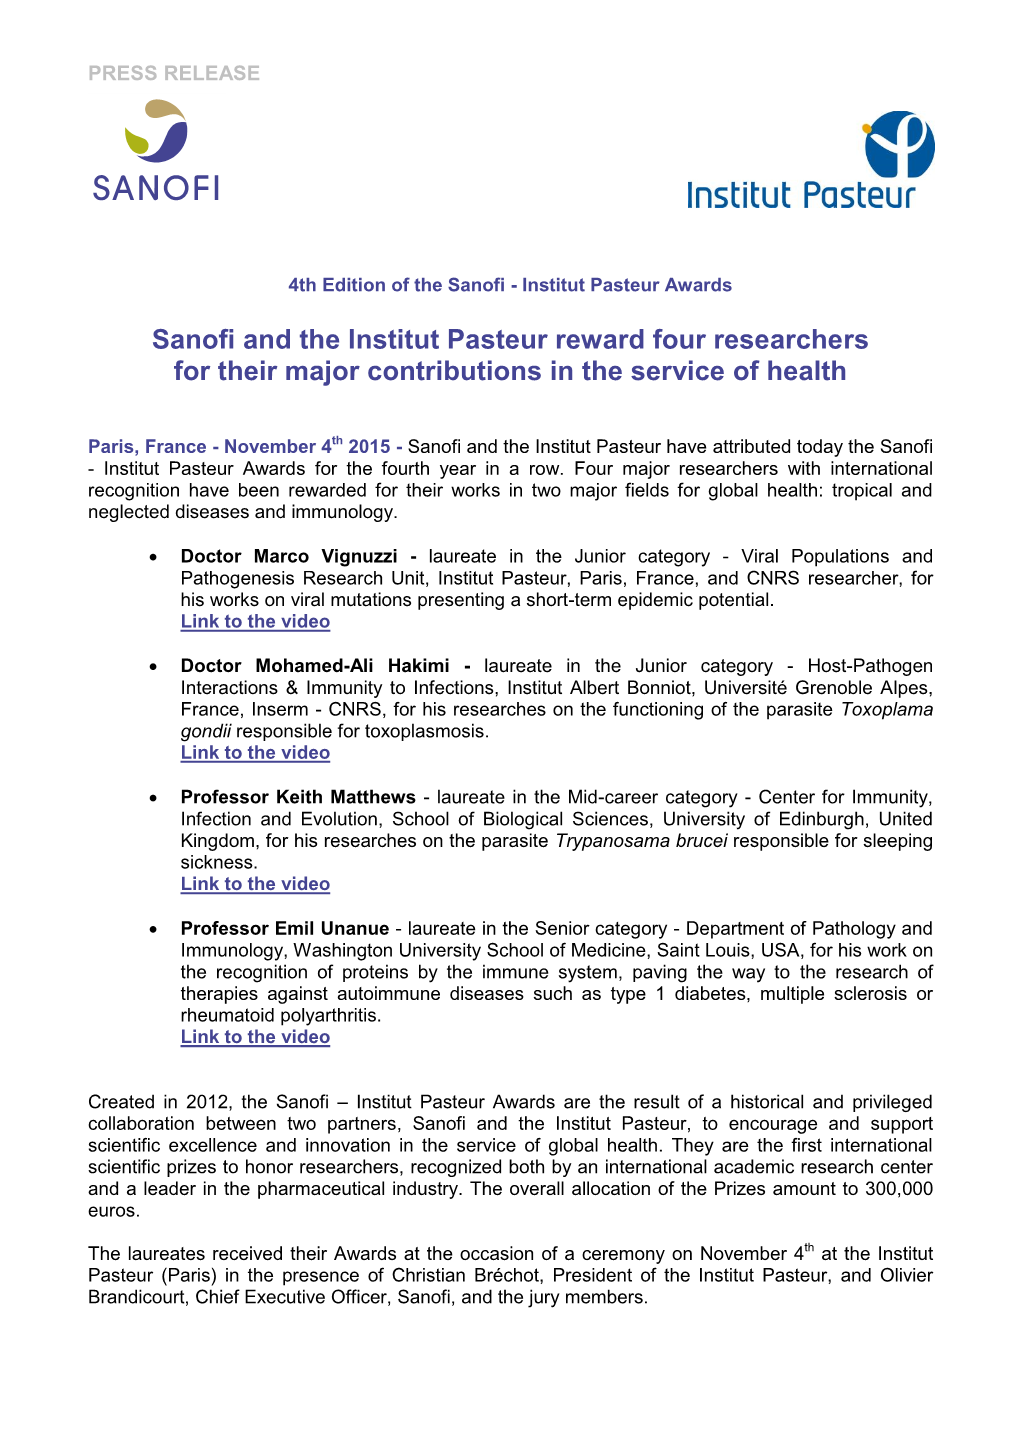 Sanofi and the Institut Pasteur Reward Four Researchers for Their Major Contributions in the Service of Health